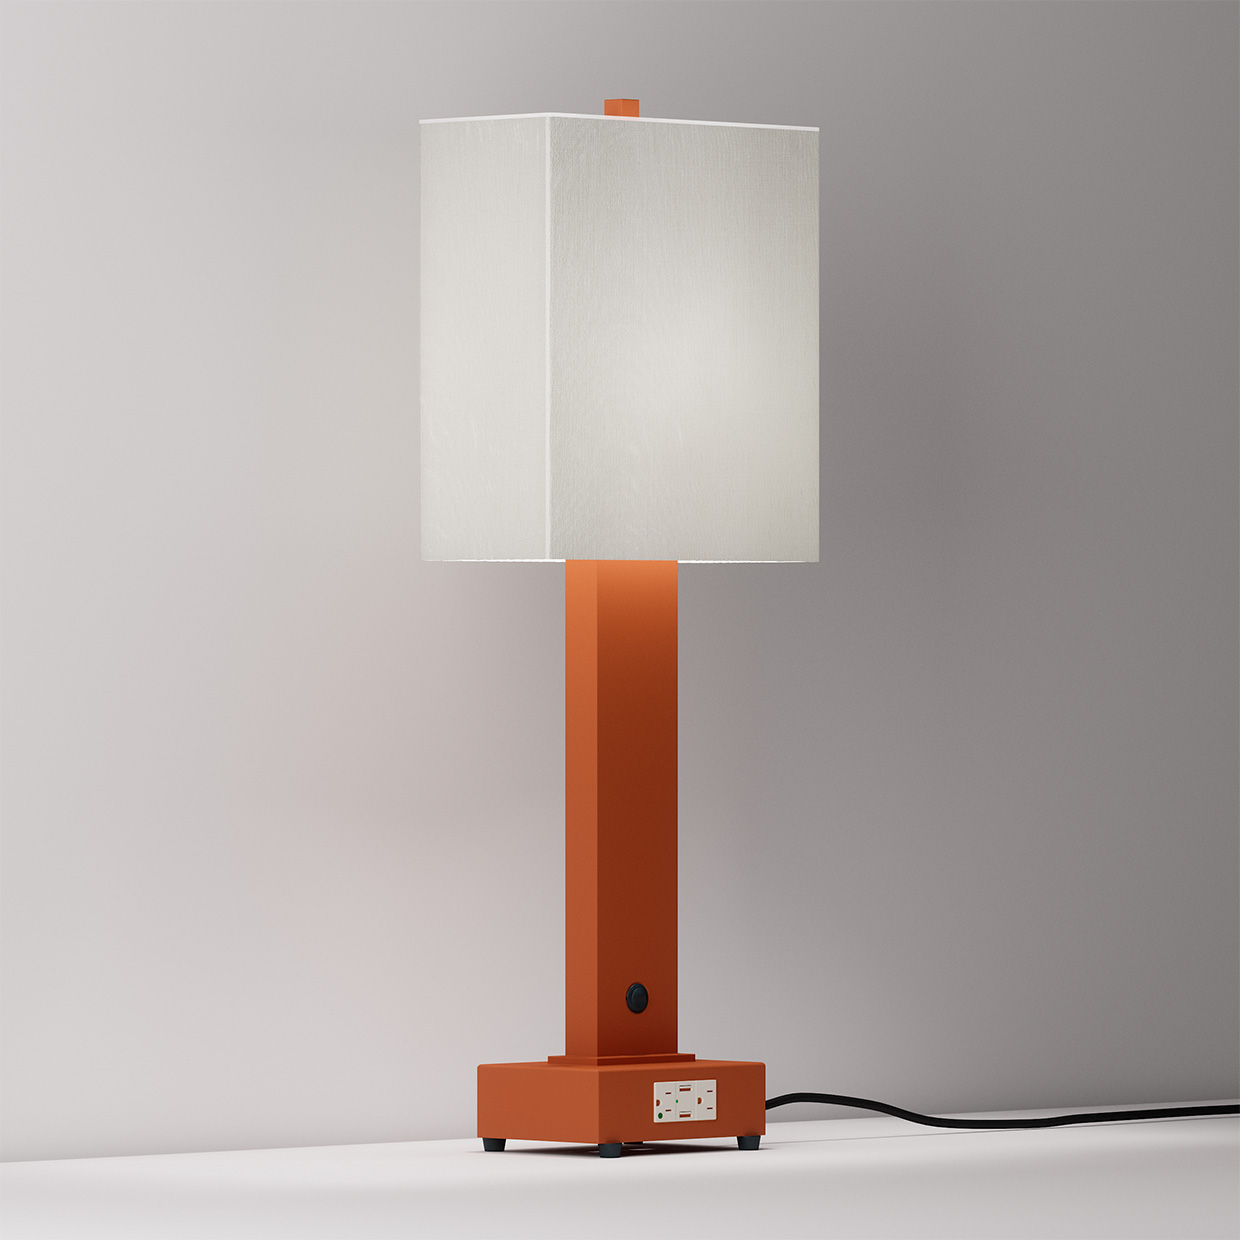 Serenity table lamp for healthcare with terracotta paint finish 